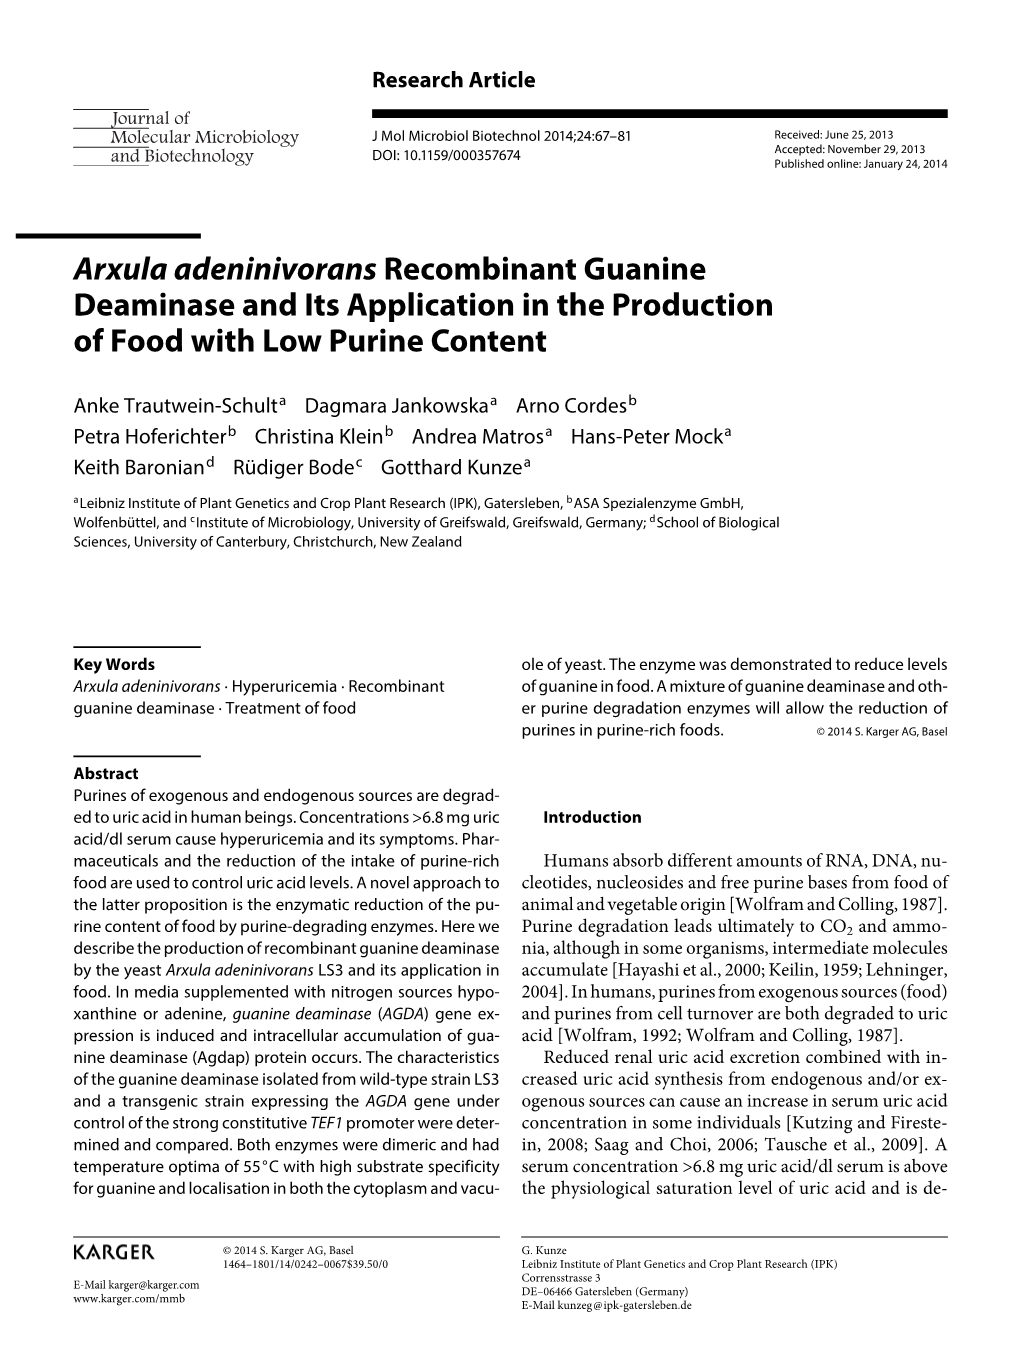 Arxula Adeninivorans Recombinant Guanine Deaminase and Its Application in the Production of Food with Low Purine Content